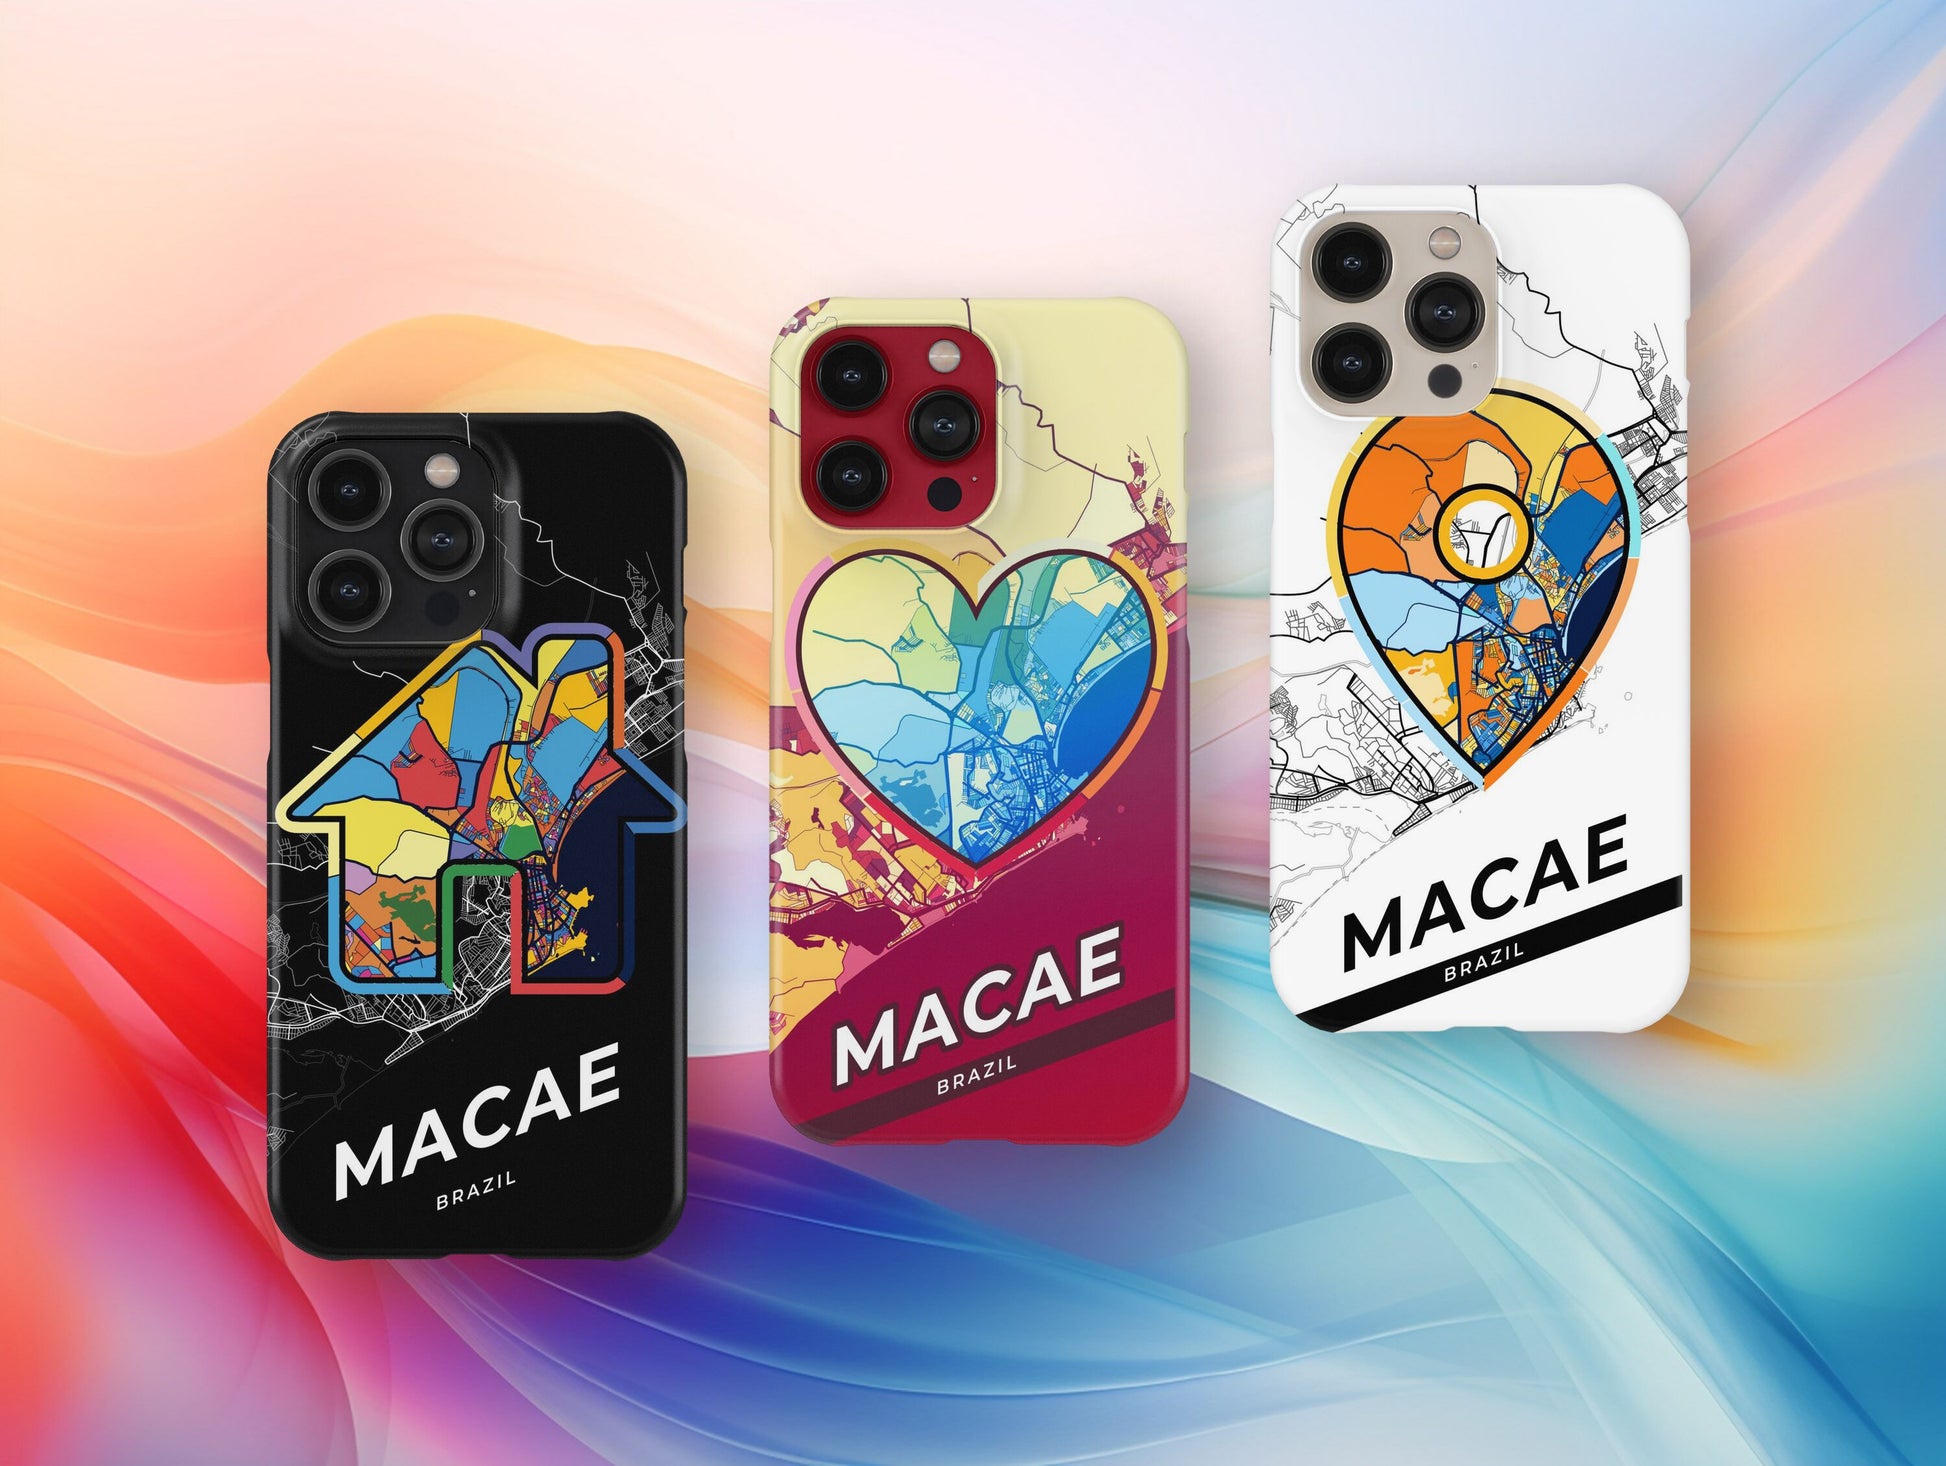 Macae Brazil slim phone case with colorful icon. Birthday, wedding or housewarming gift. Couple match cases.